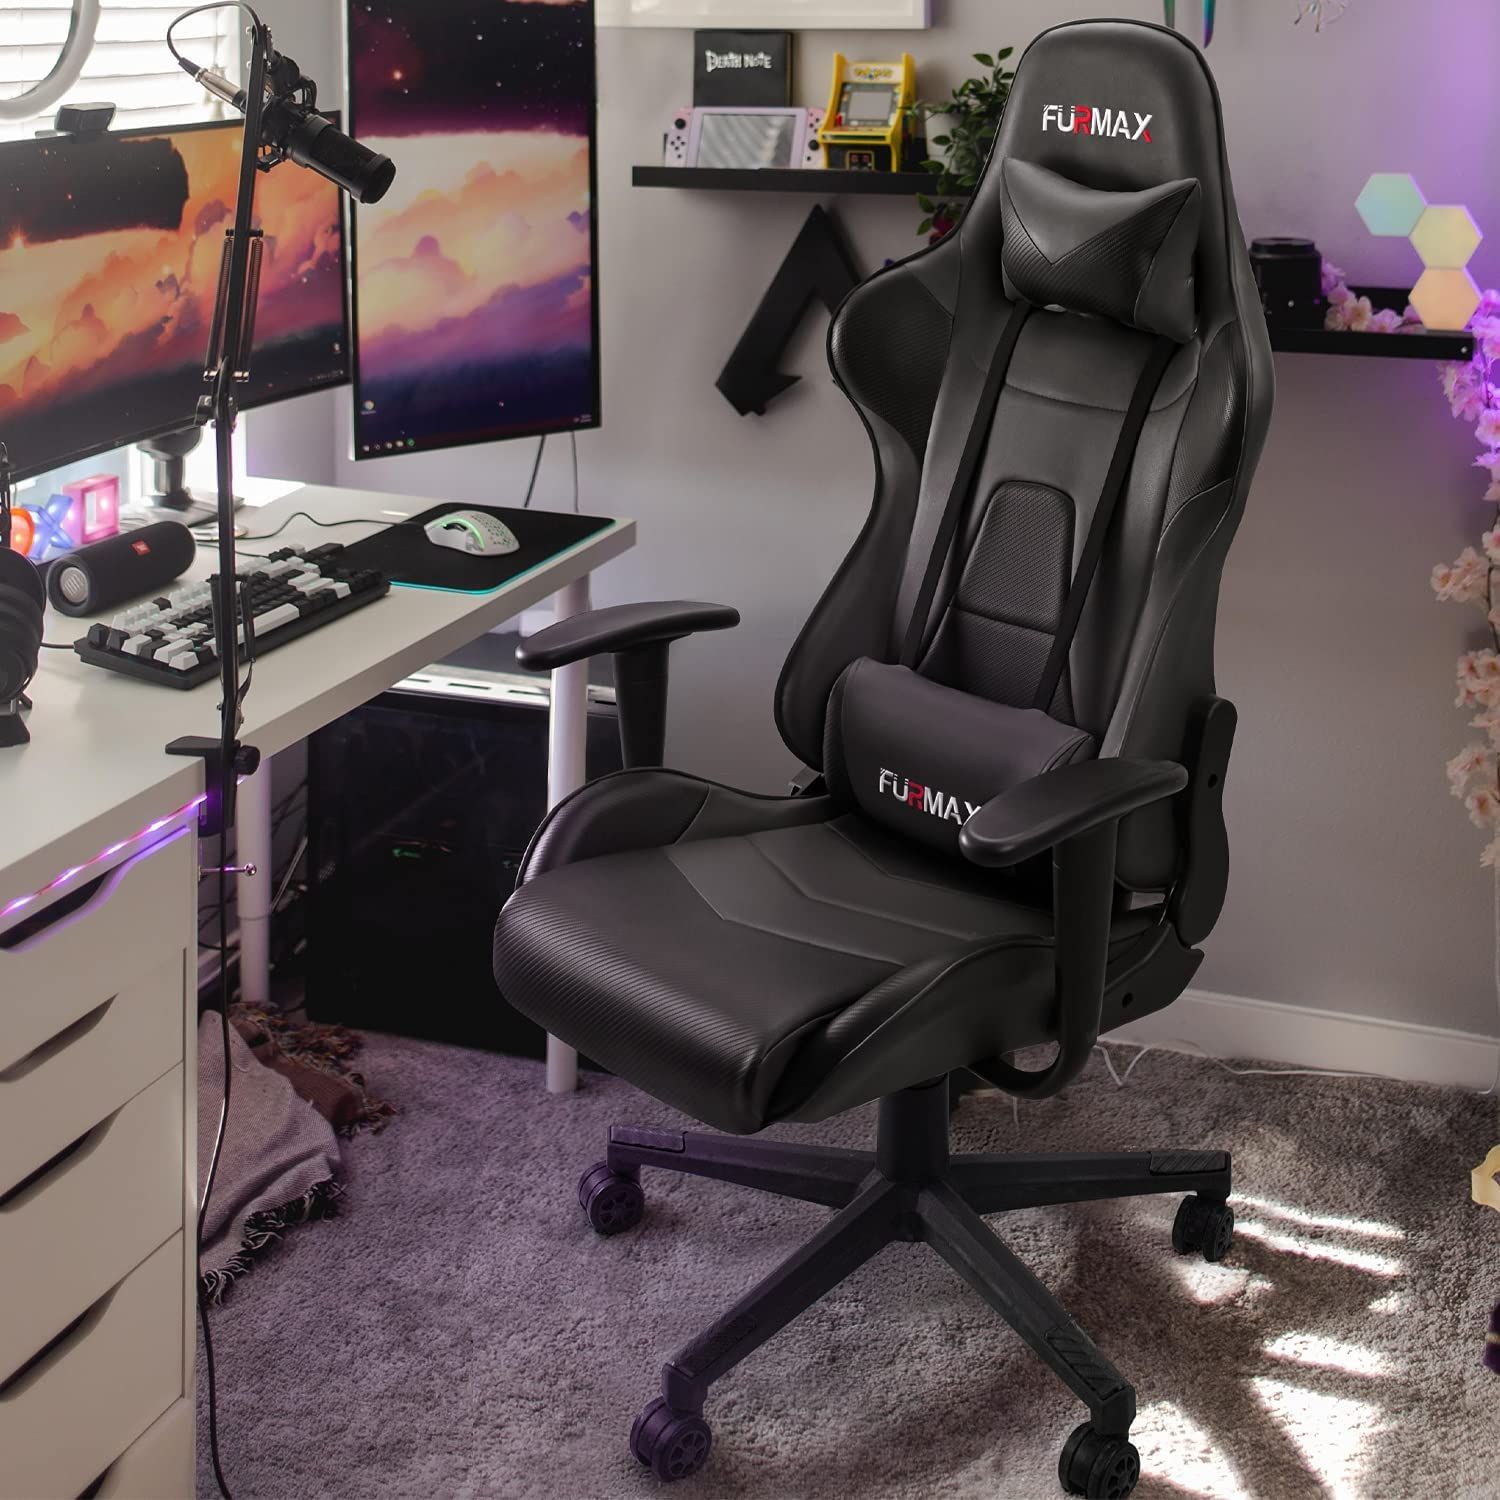 Best Gaming Chairs Under $100 (Updated 2022)